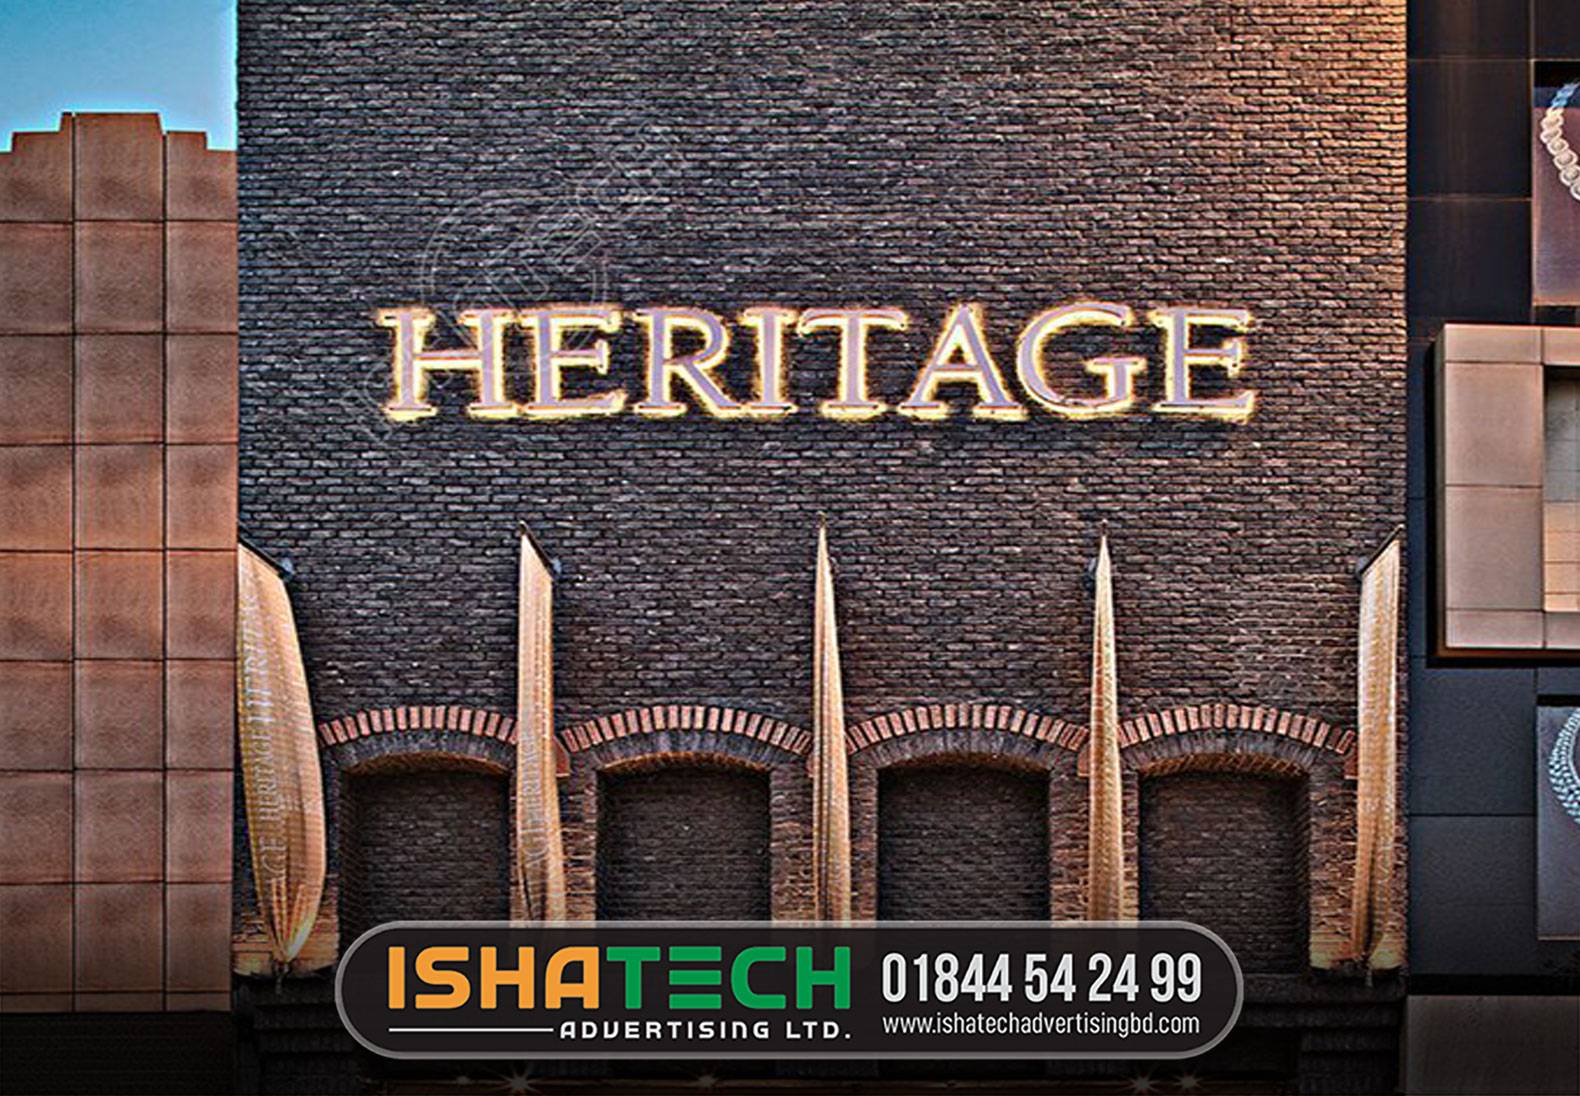 HERITAGE SHOPPING MALL LED SIGNS | SIGNBOARD BD | BILLBOARD BD | LED AD BD